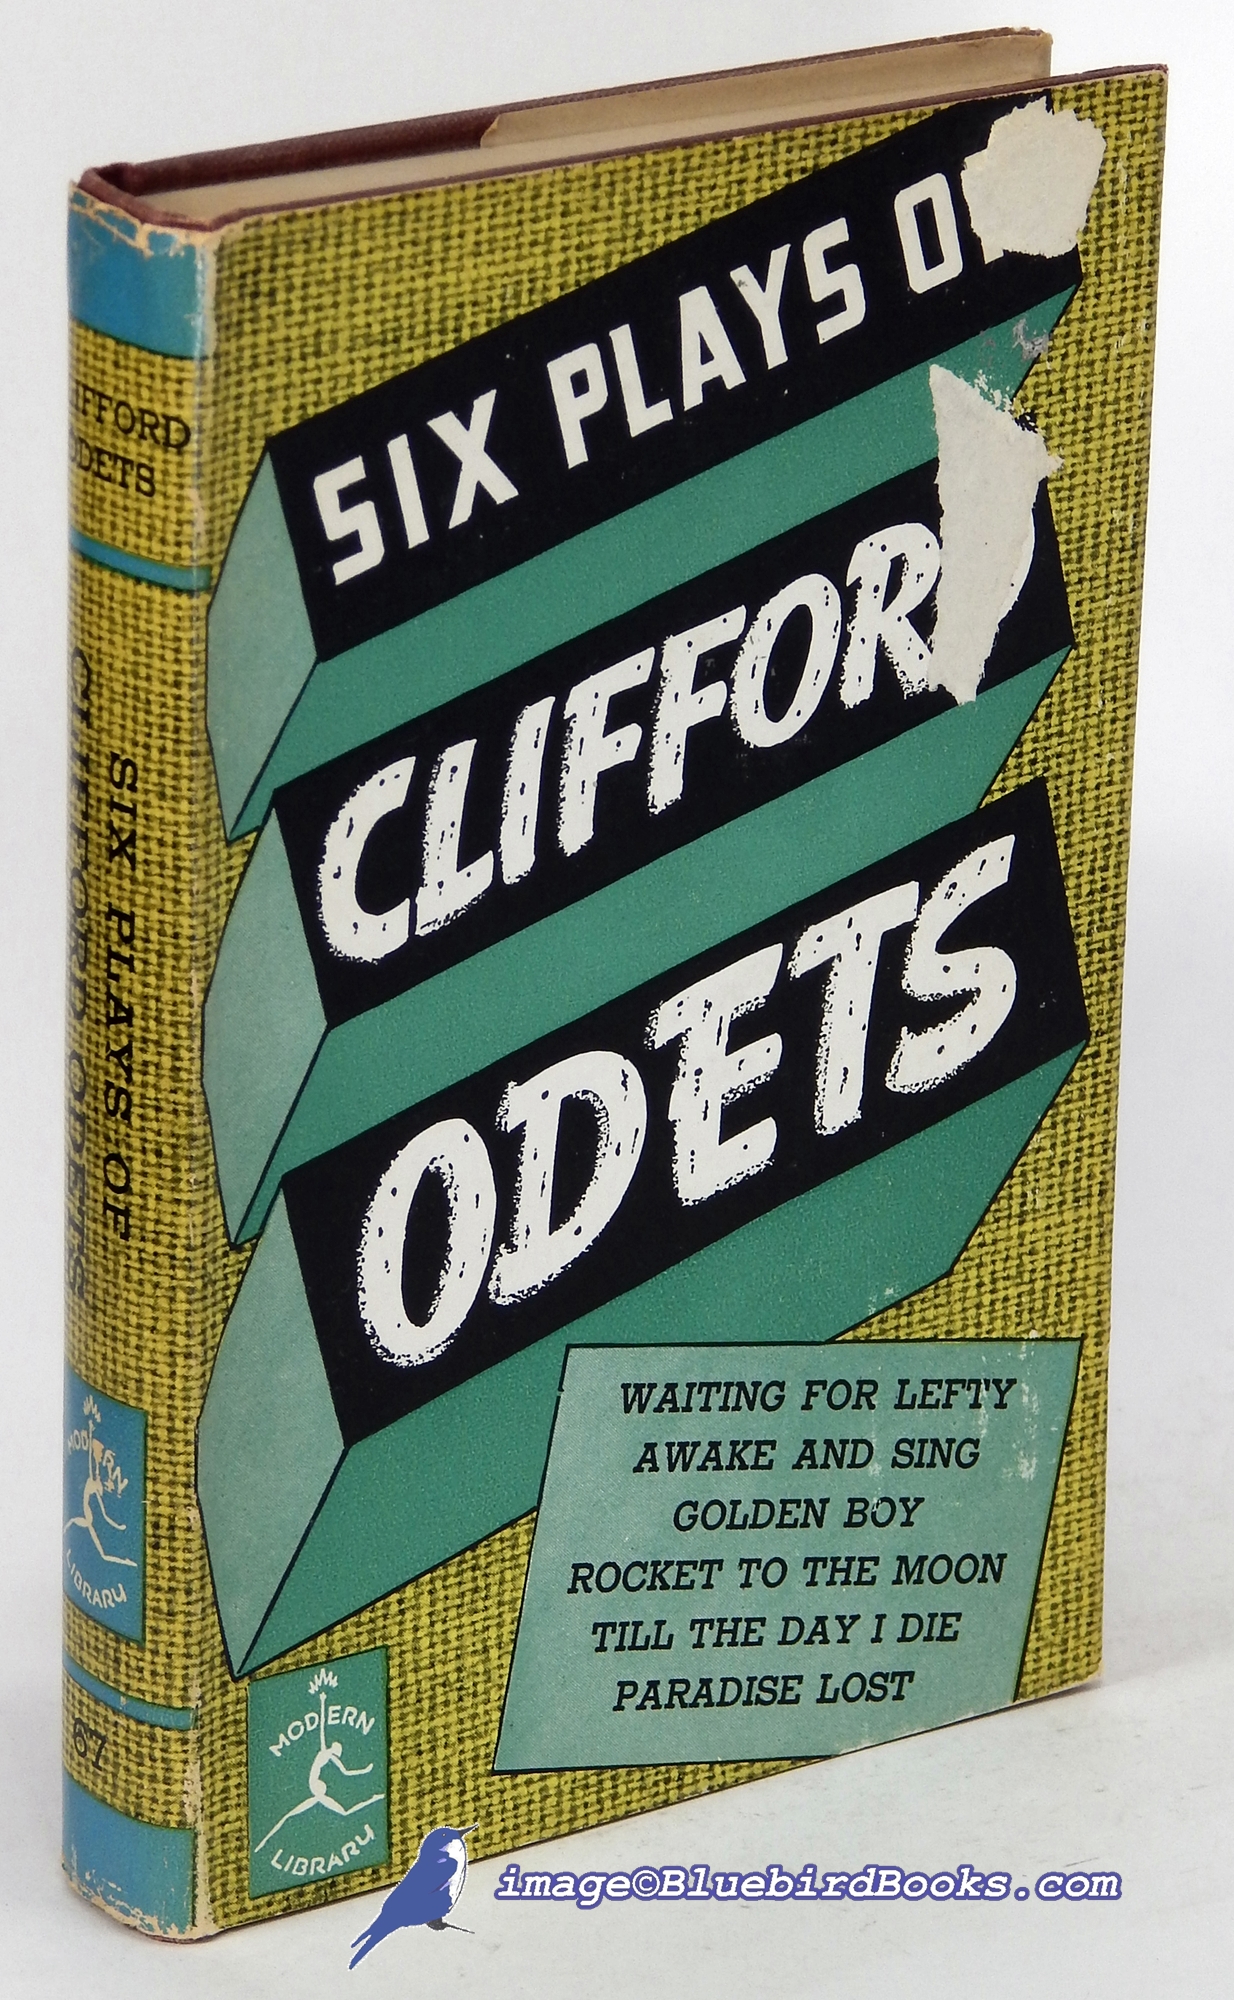 ODETS, CLIFFORD - Six Plays of Clifford Odets: Waiting for Lefty, Awake & Sing!, Till the Day I Die, Paradise Lost, Golden Boy, Rocket to the Moon (Modern Library #67. 2)